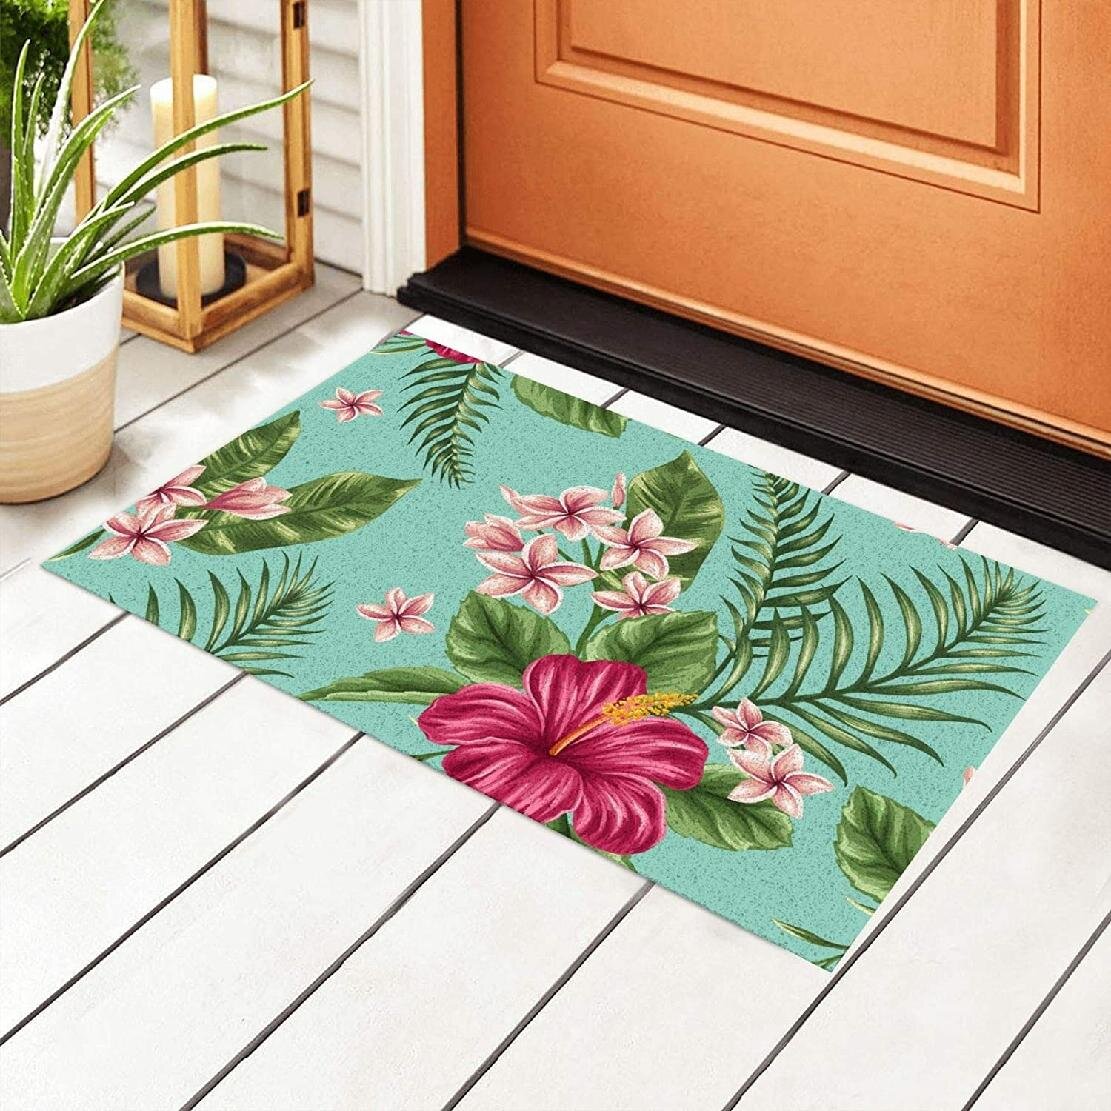 Tropical Leaves Kitchen Floor Mats Non Slip Holiday Rugs Small Area Rug for Living Room Bathroom Porch